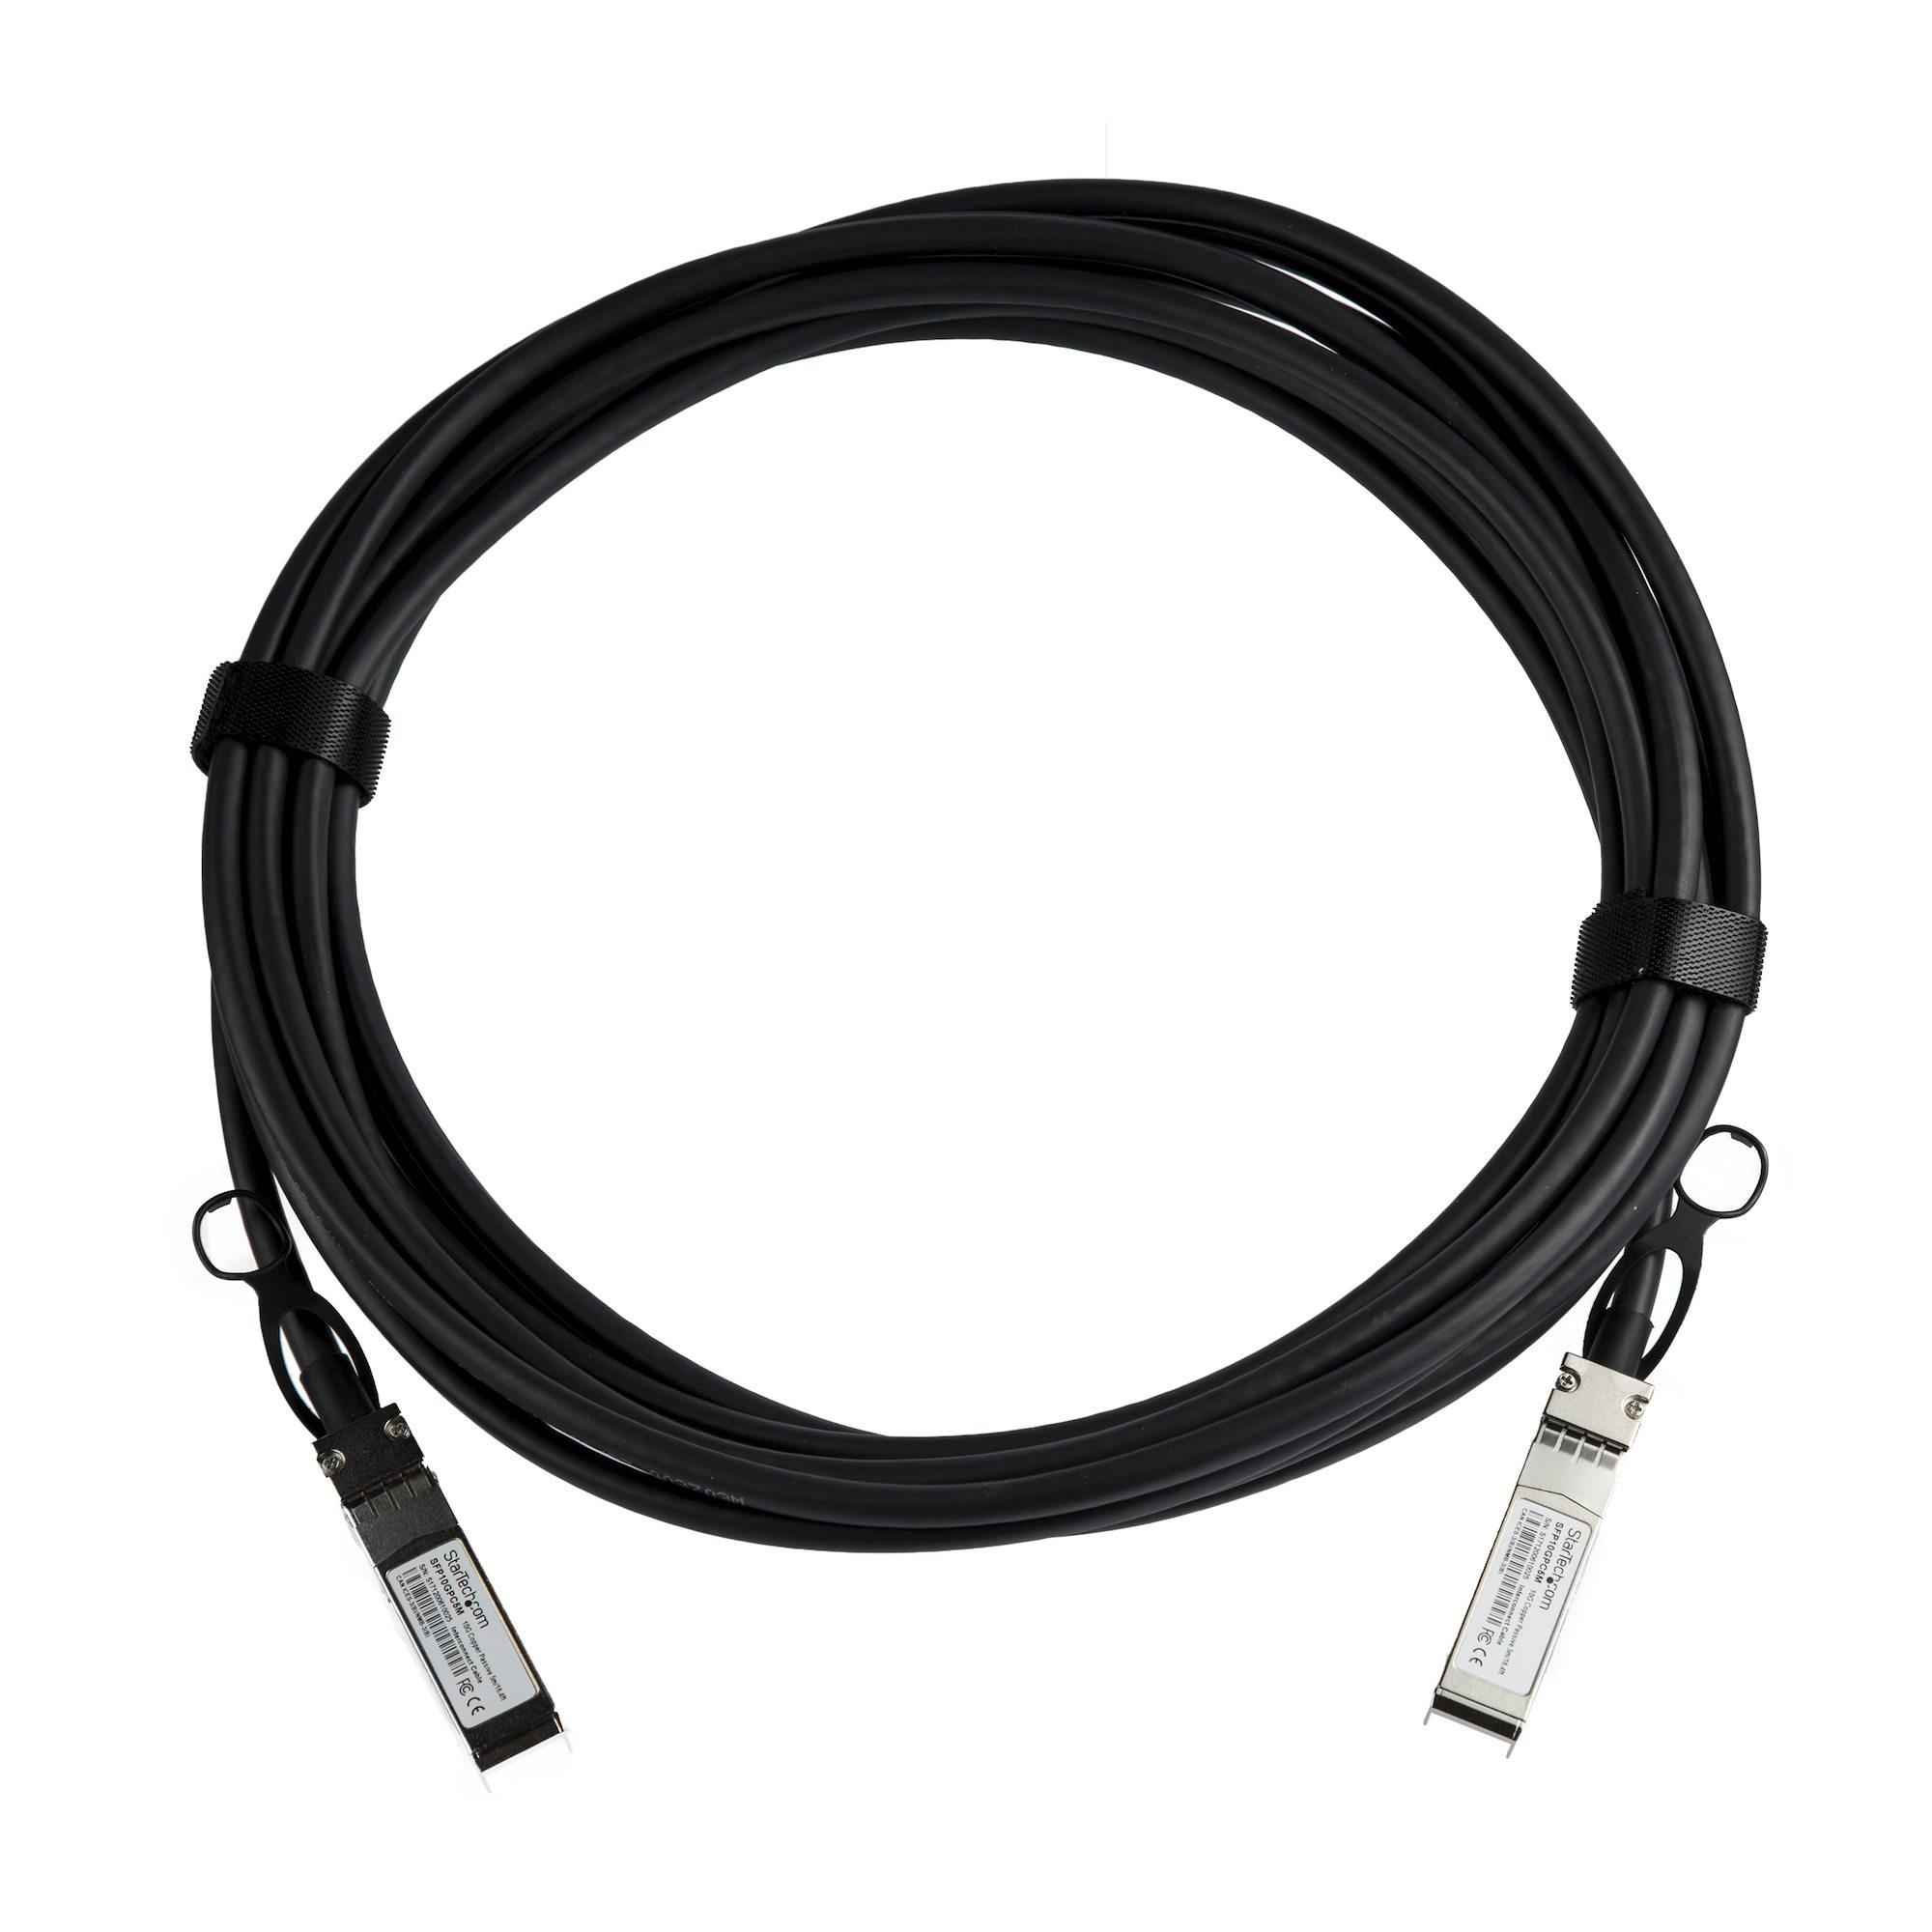 Cables Quzo UK – Buy Online – Free UK Delivery – PayPal Accepted